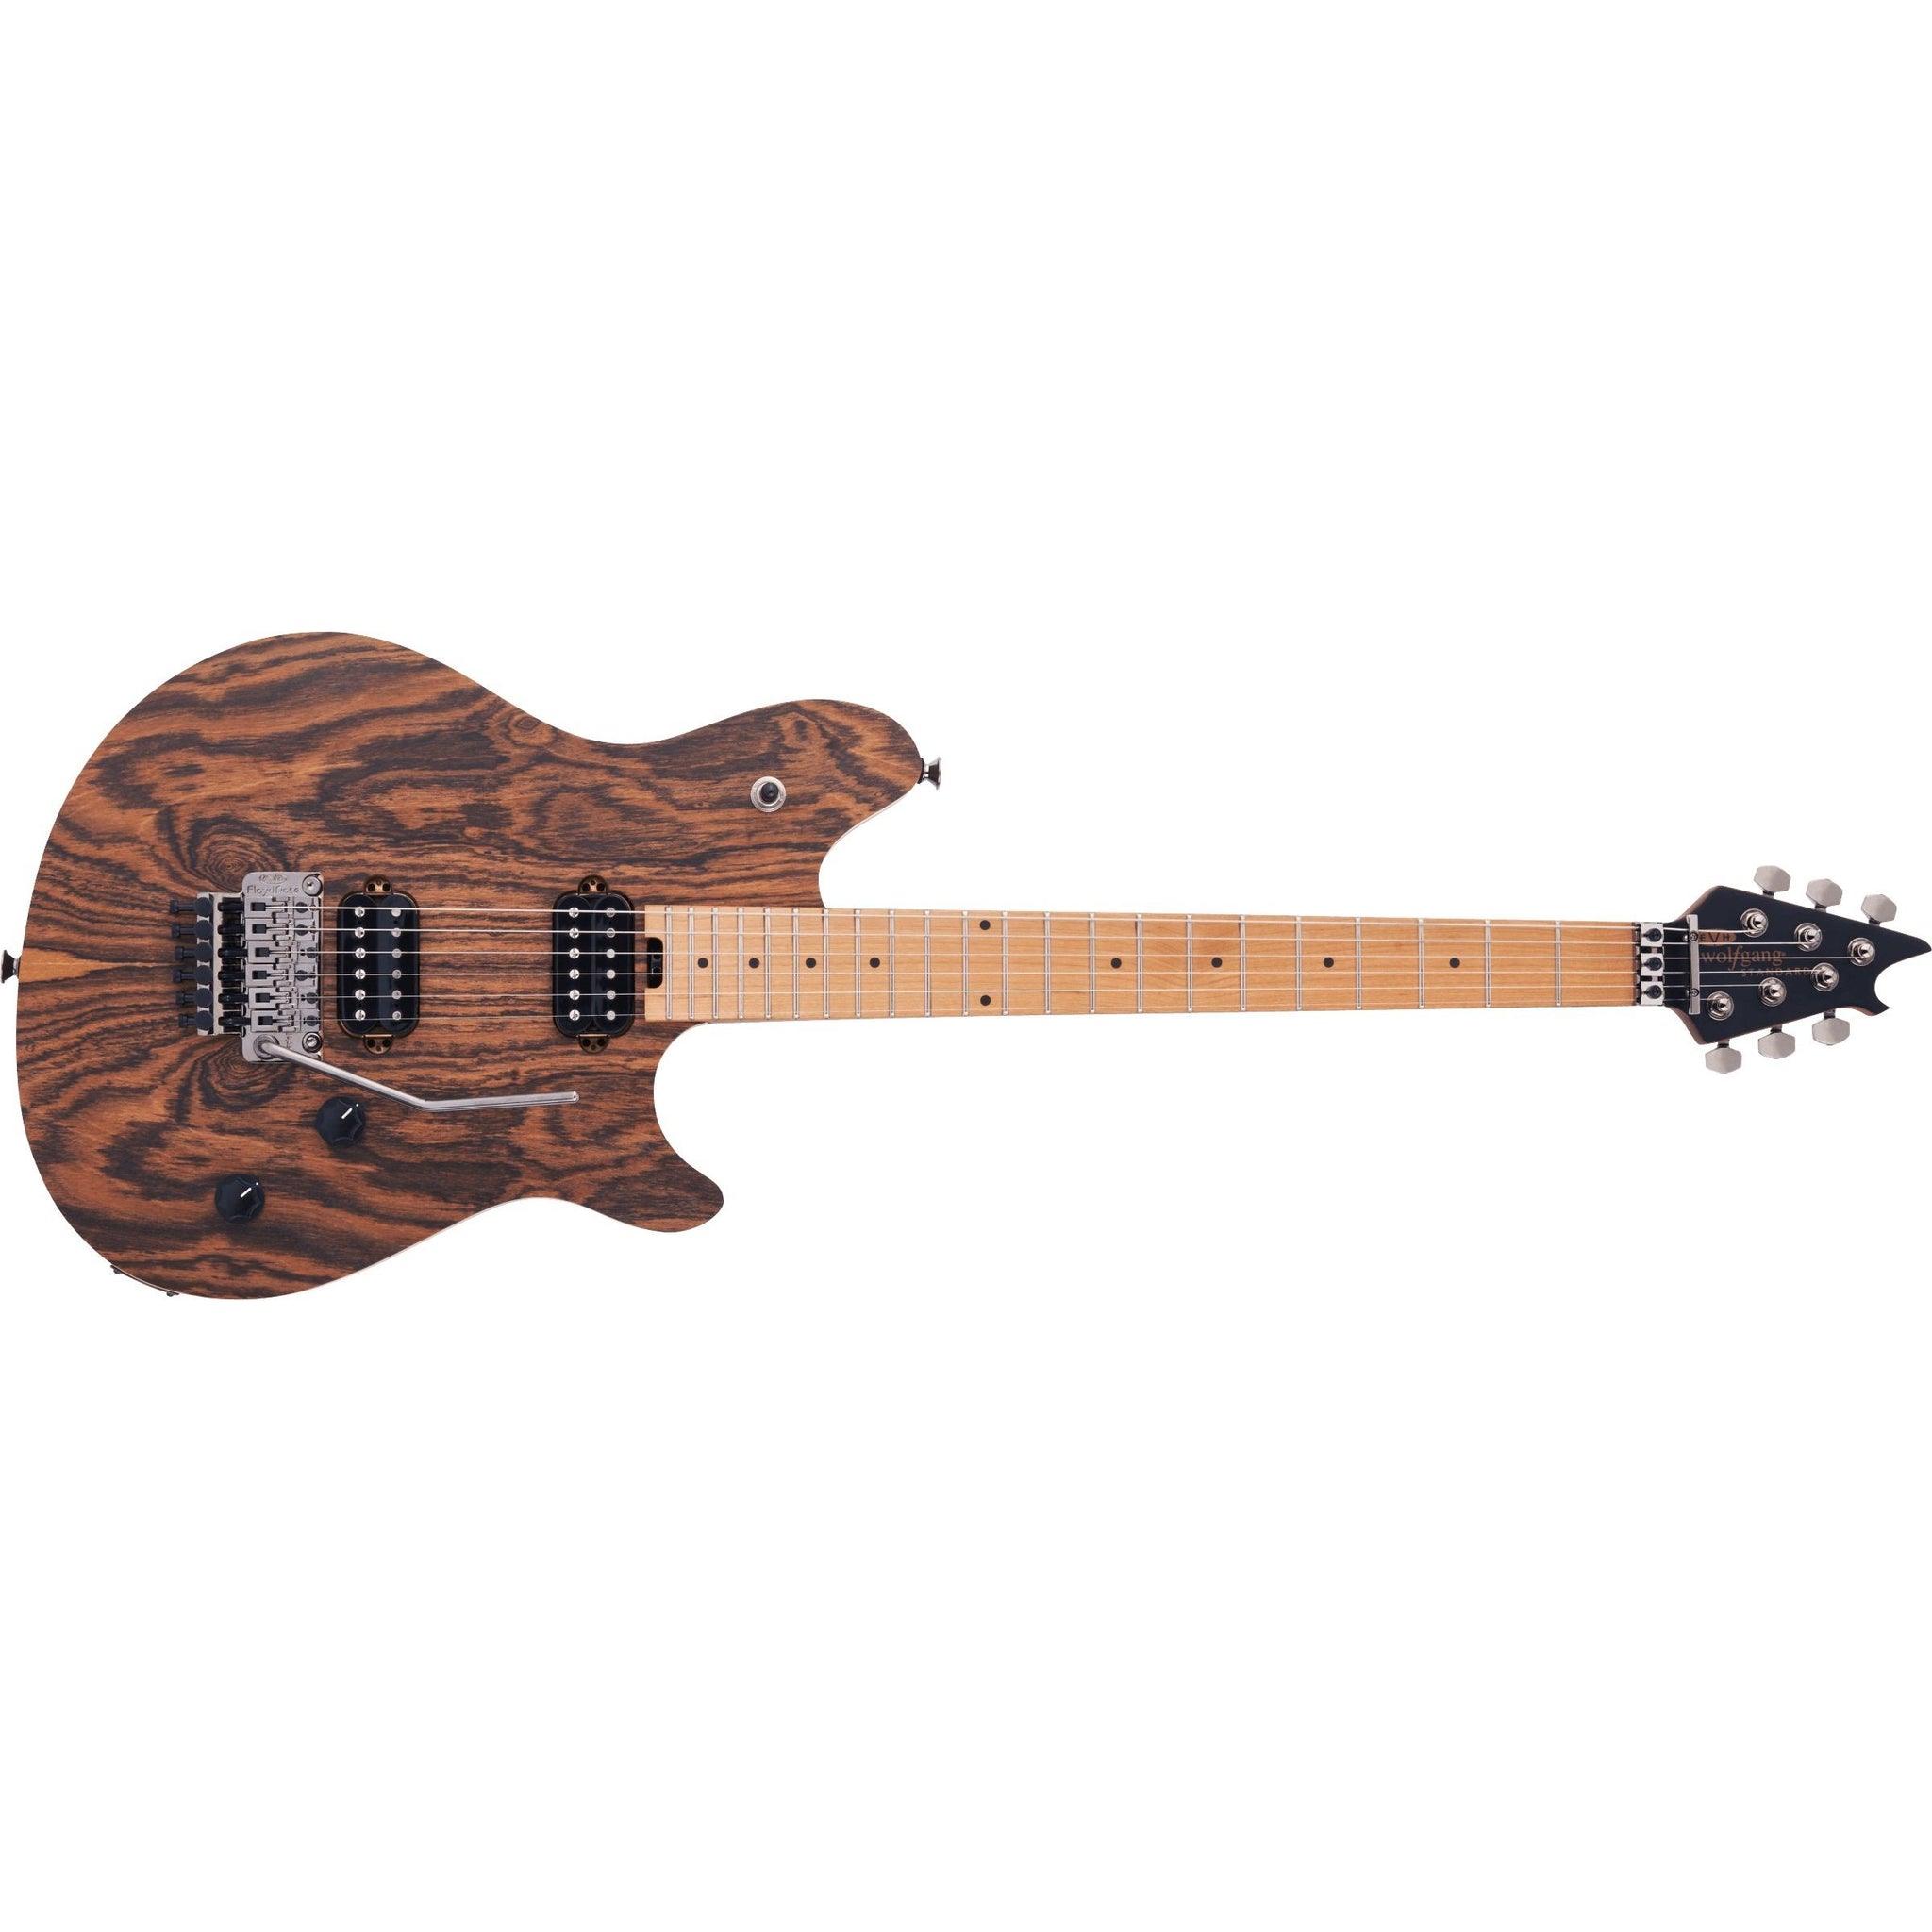 EVH Wolfgang Standard Exotic Bocote Electric Guitar with Baked Maple Fingerboard-Natural-Music World Academy